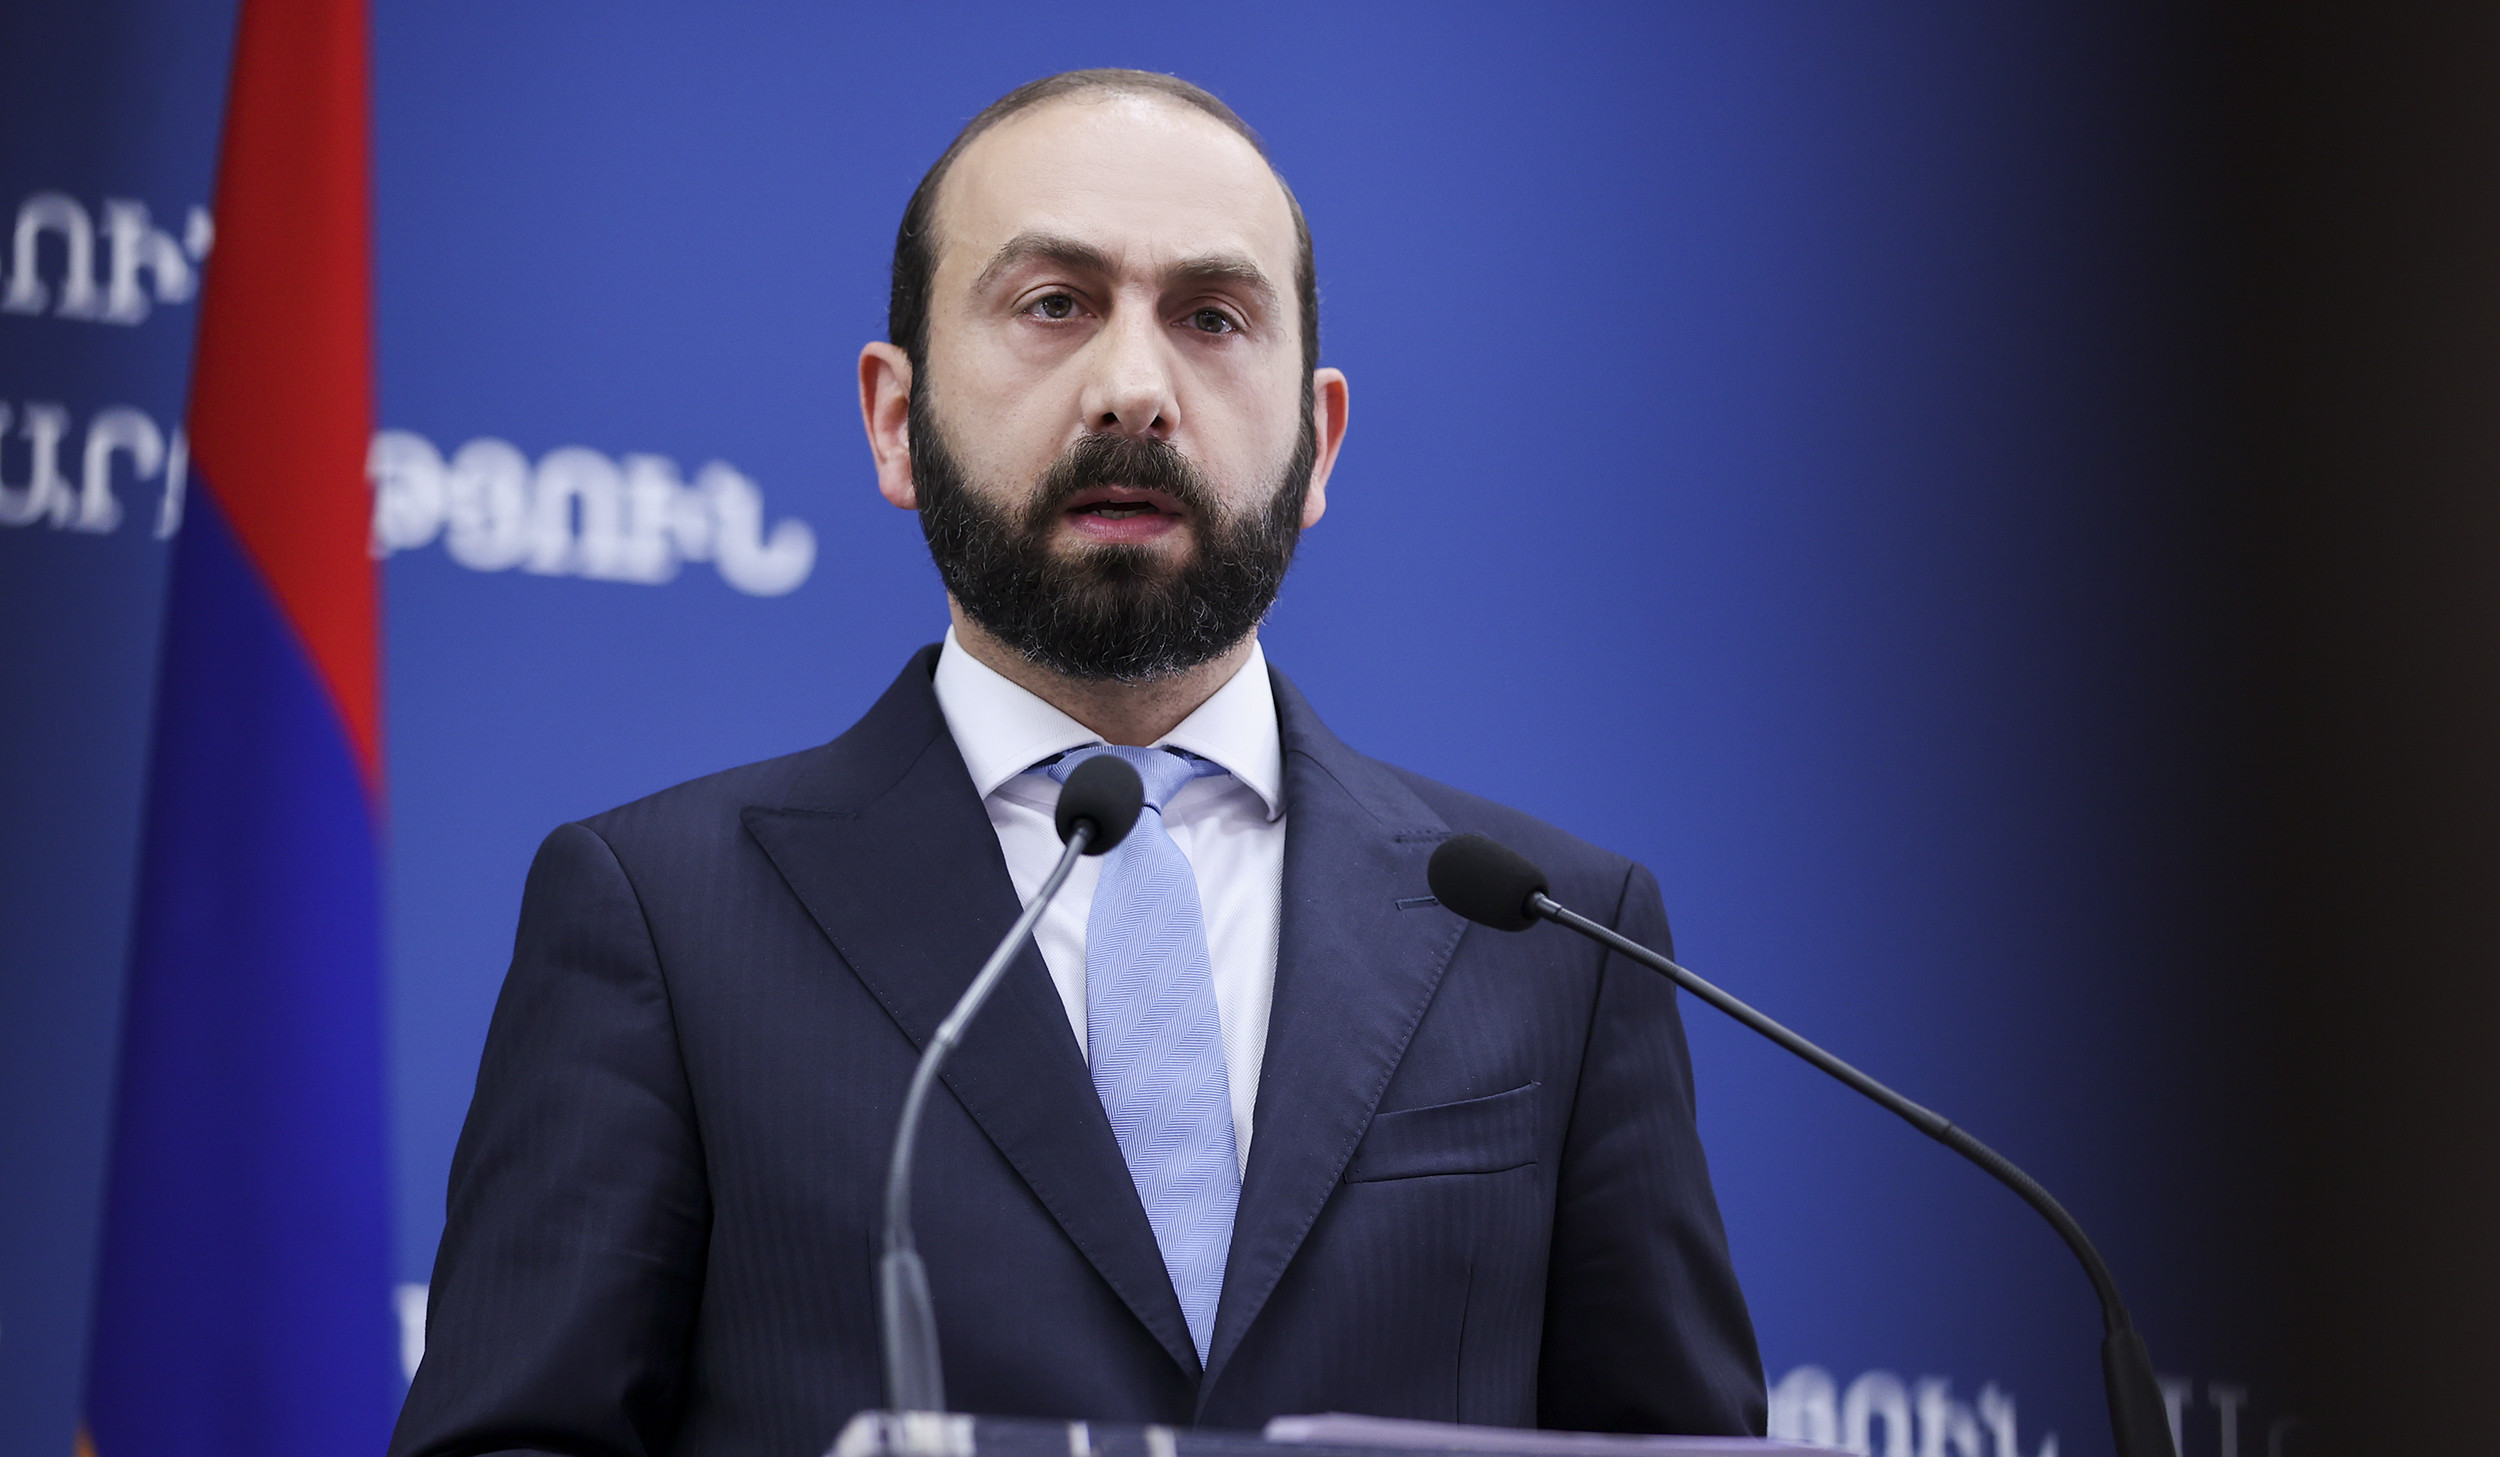 Egypt is a friendly and reliable partner for Armenia: Mirzoyan